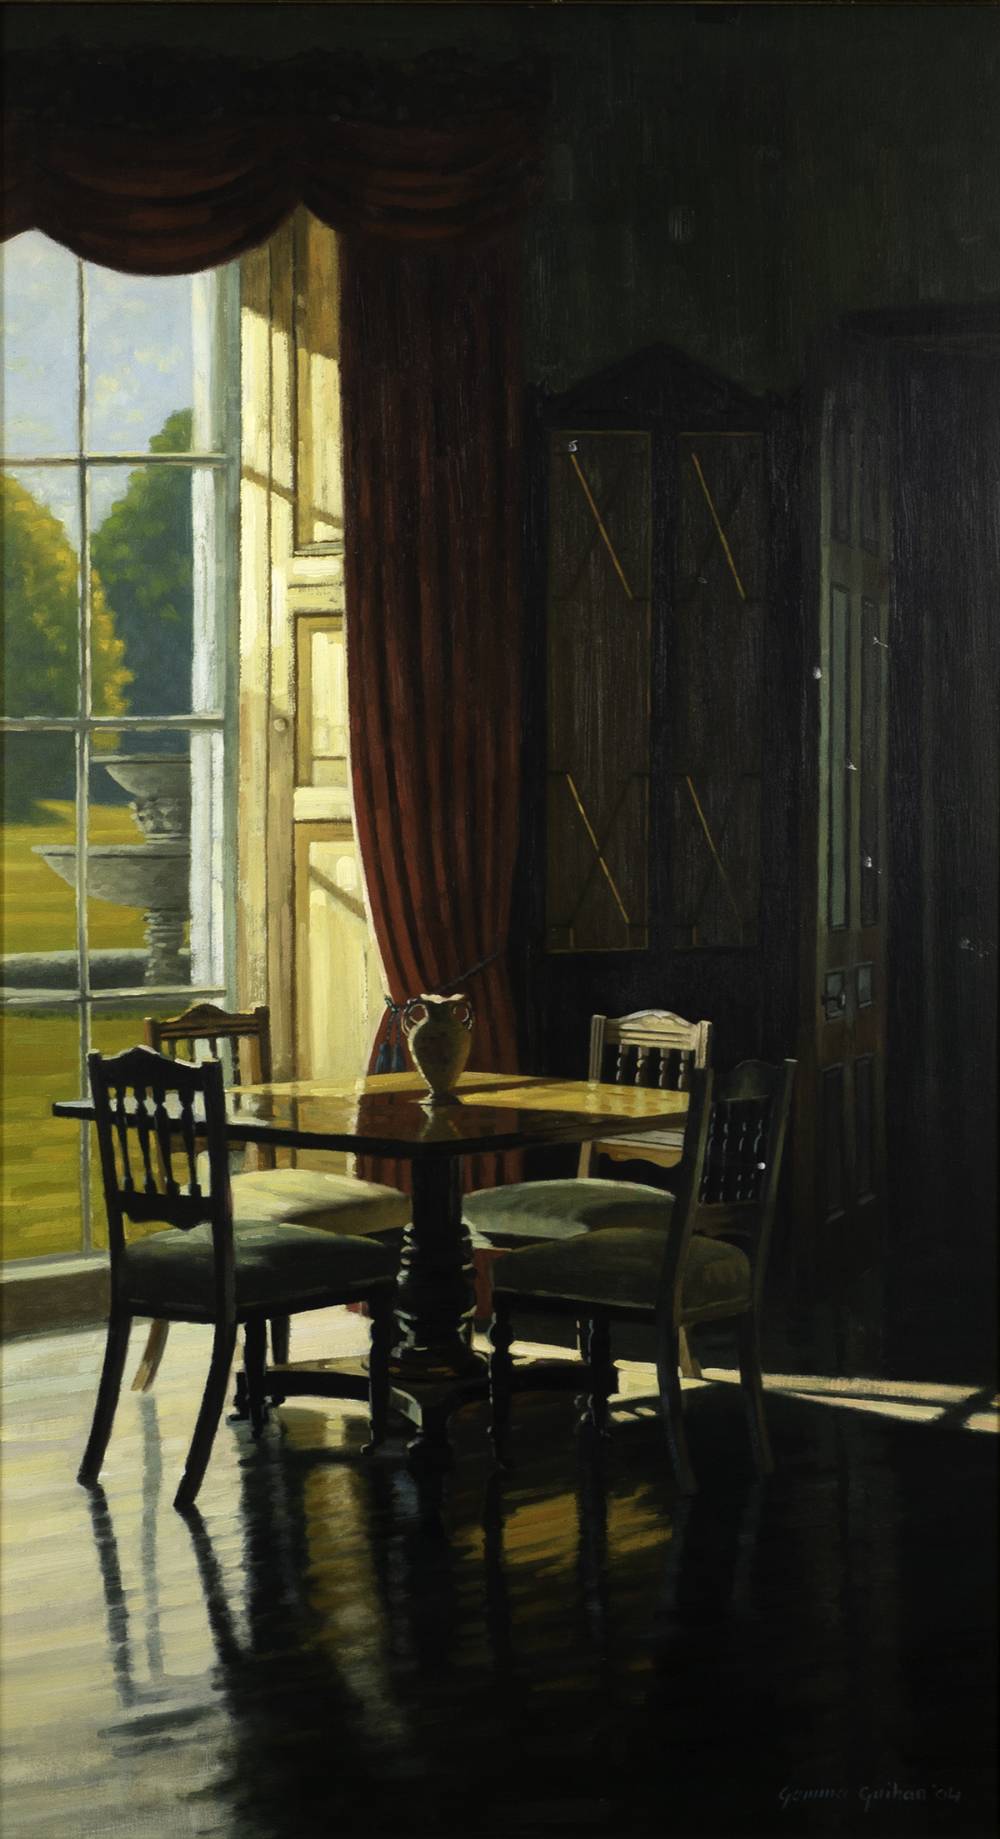 A QUIET MOMENT, 2004 by Gemma Guihan sold for 800 at Whyte's Auctions